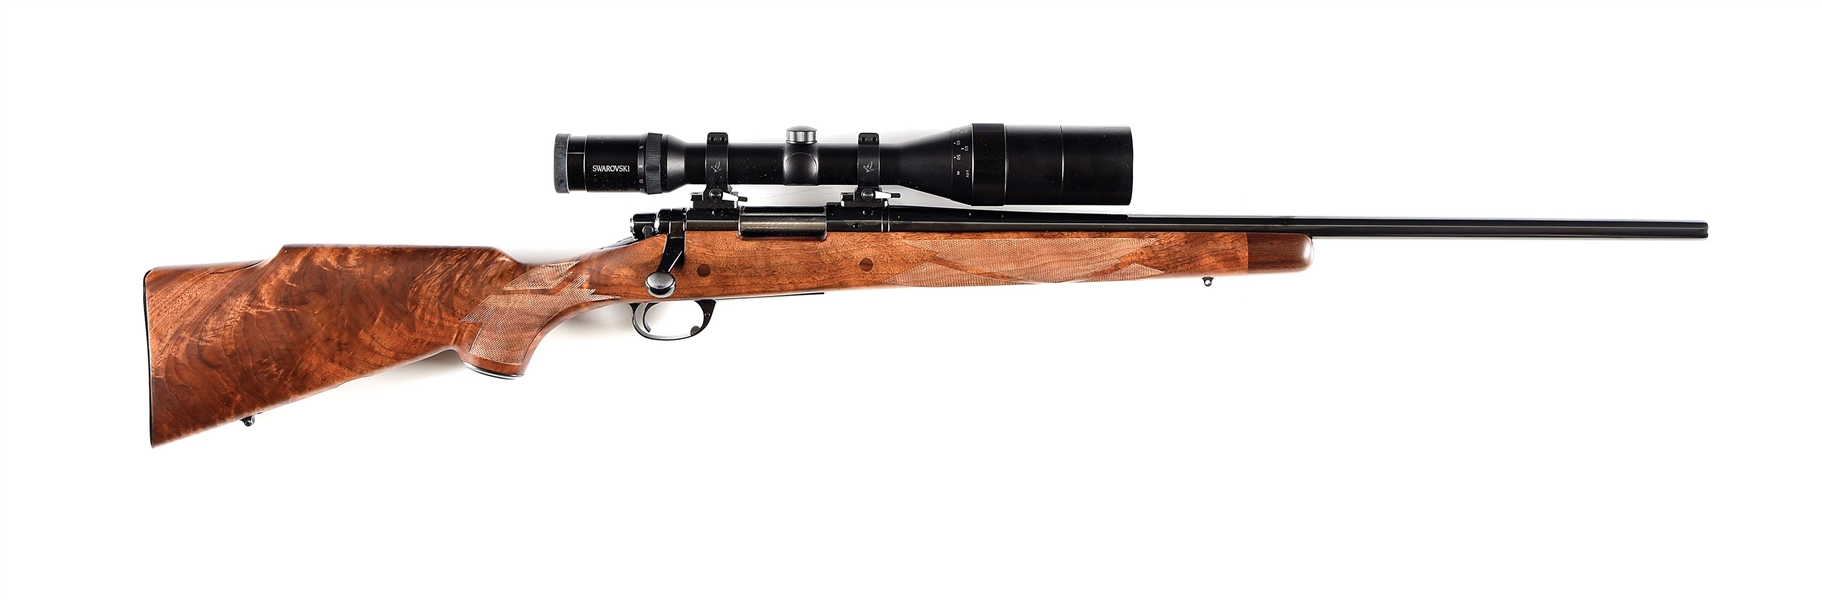 (M) SPECIAL ORDER DELUXE REMINGTON MODEL 700 BOLT ACTION RIFLE WITH SWAROVSKI OPTIC.